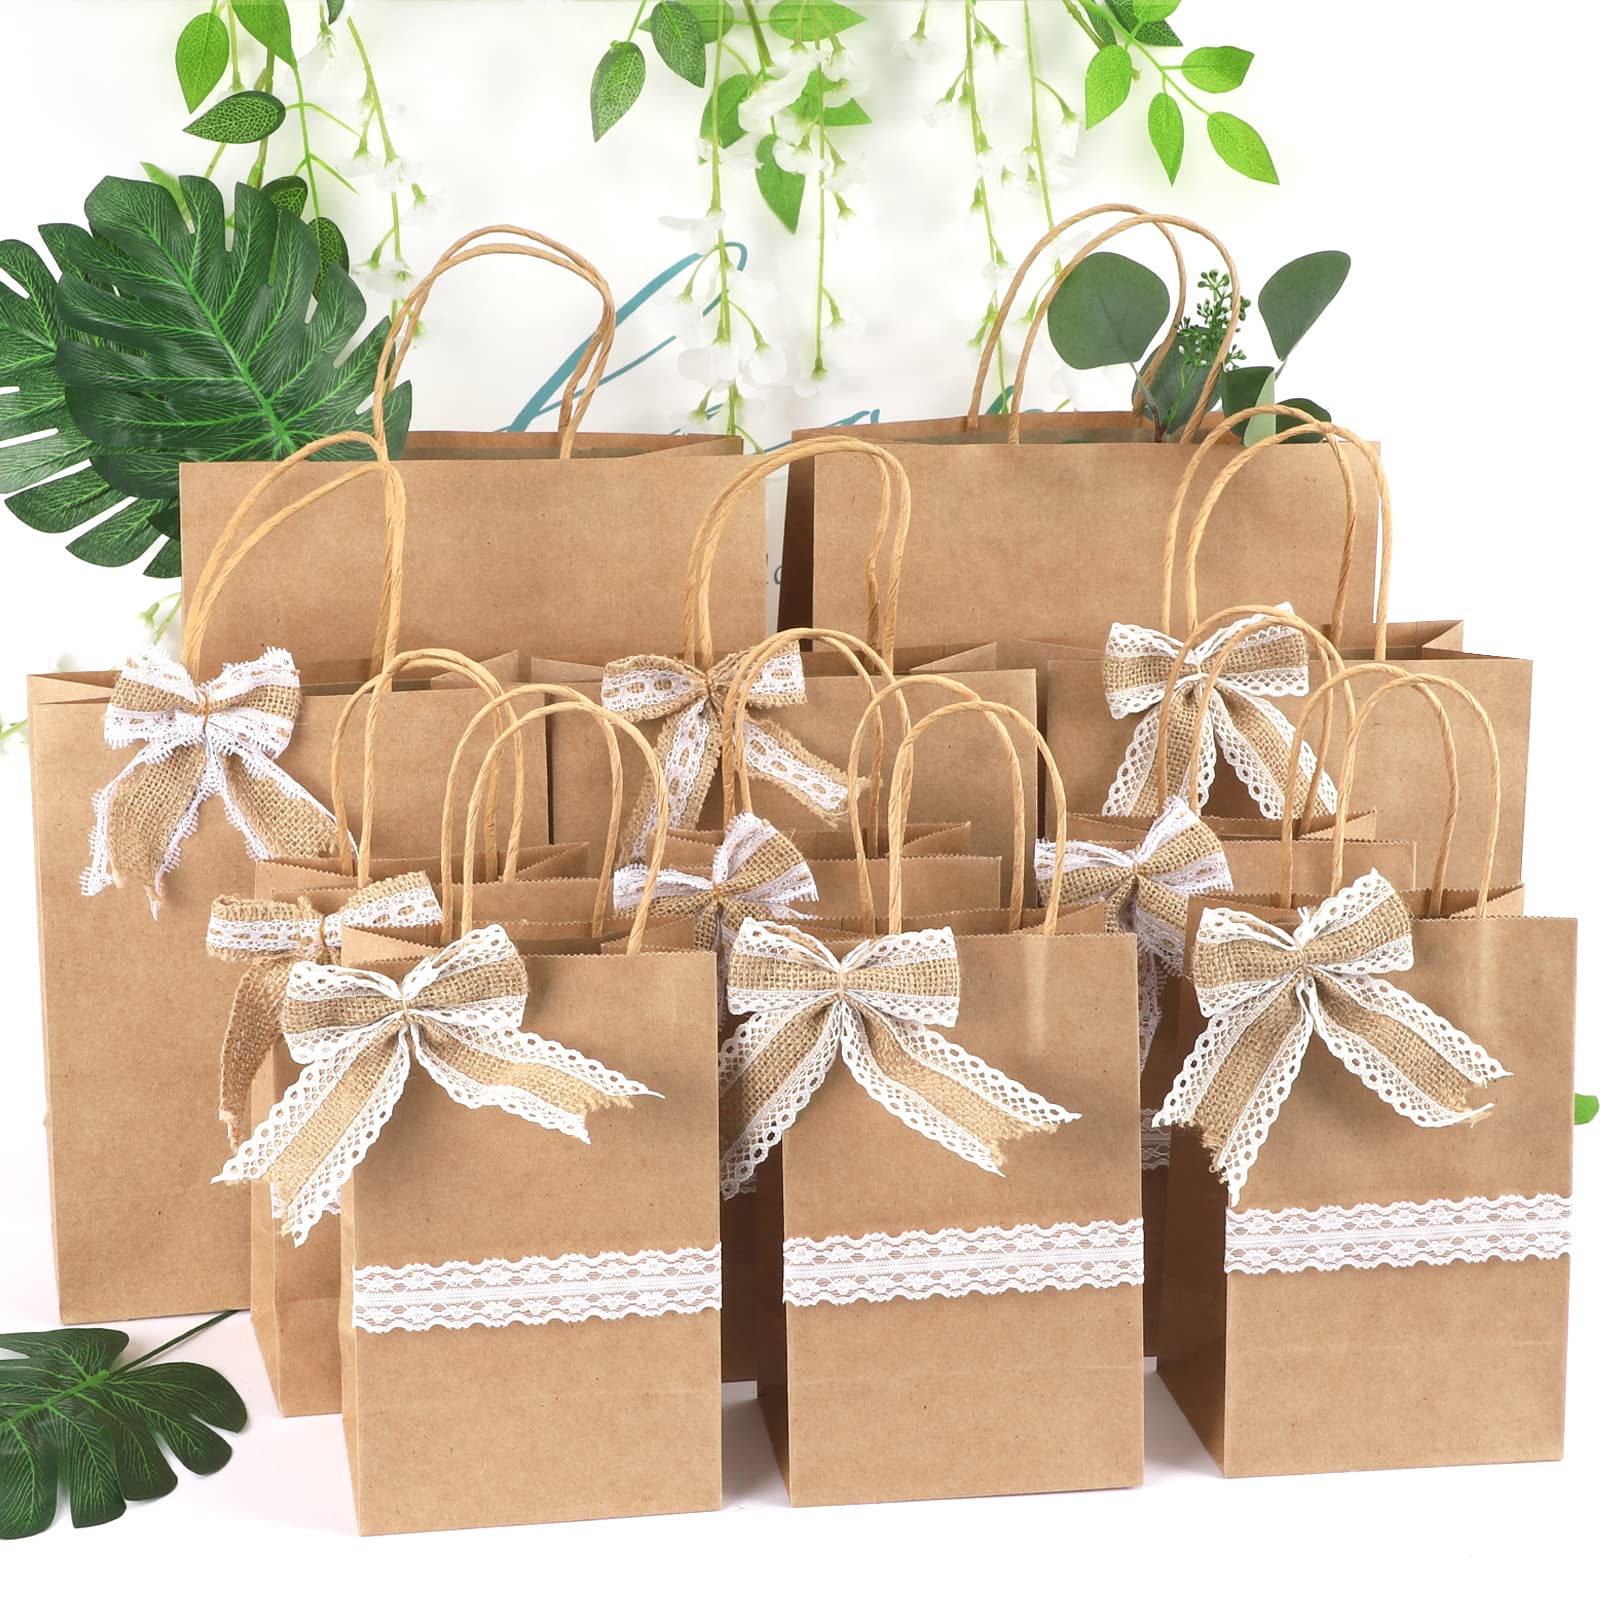 TOMNK 120pcs Brown Paper Bags with Handles Mixed Size Bulk Kraft Paper Gift Bags for Business, Shopping, Retail, Merchandise Bags